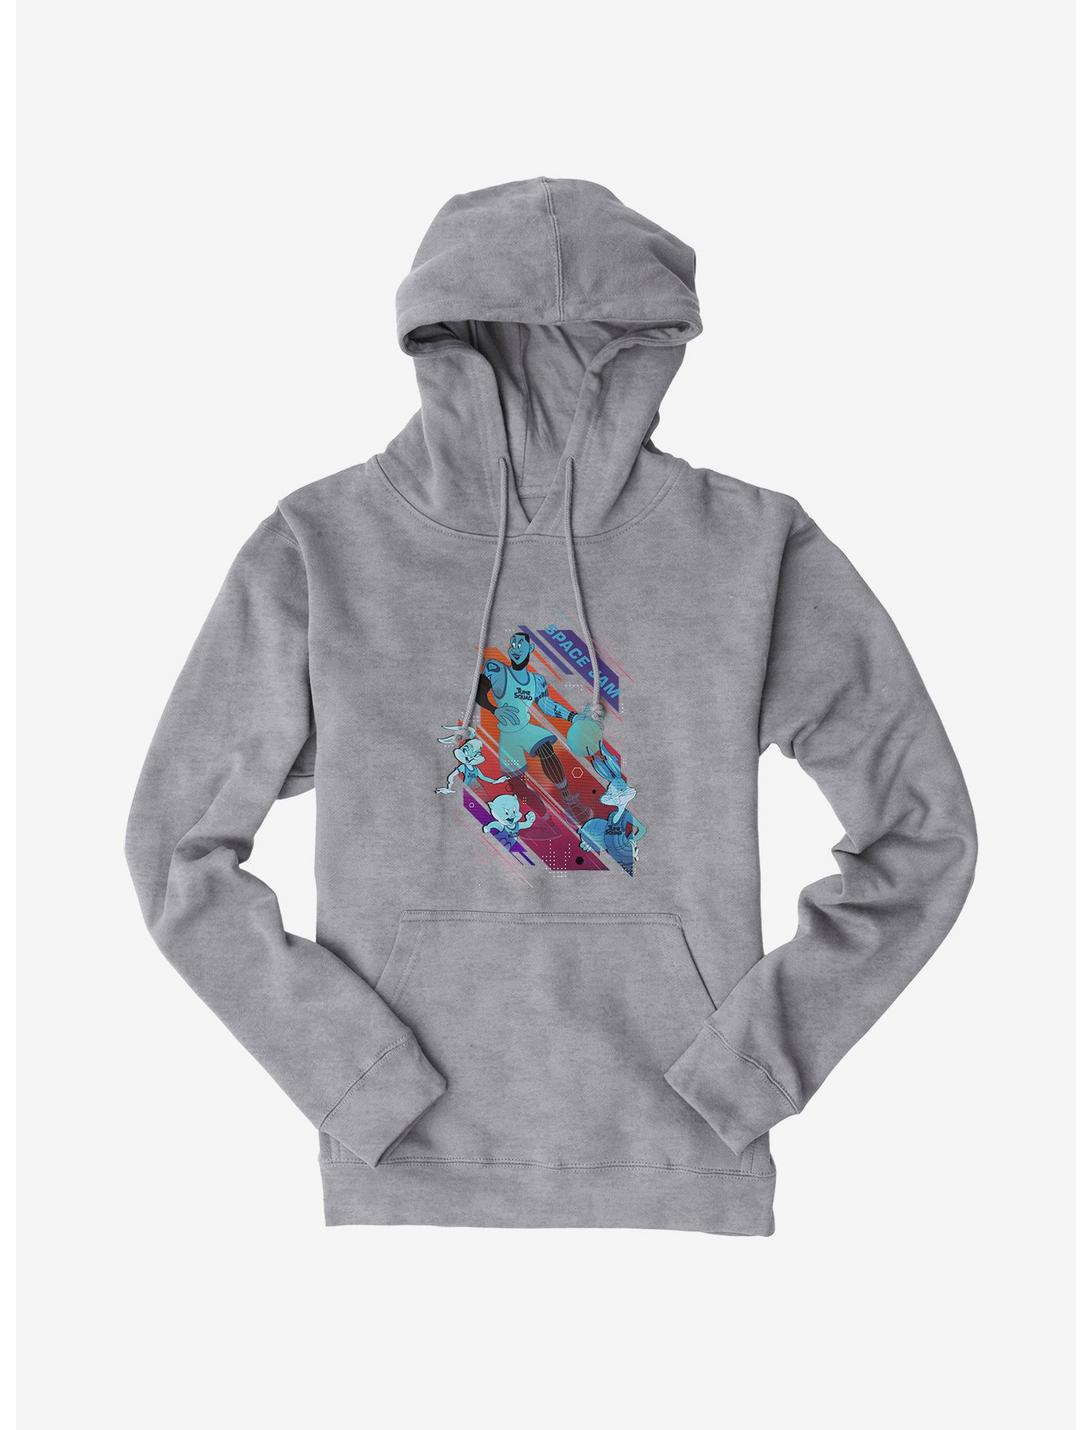 Space Jam: A New Legacy LeBron, Bugs Bunny, Lola Bunny and Porky Pig Hoodie, , hi-res